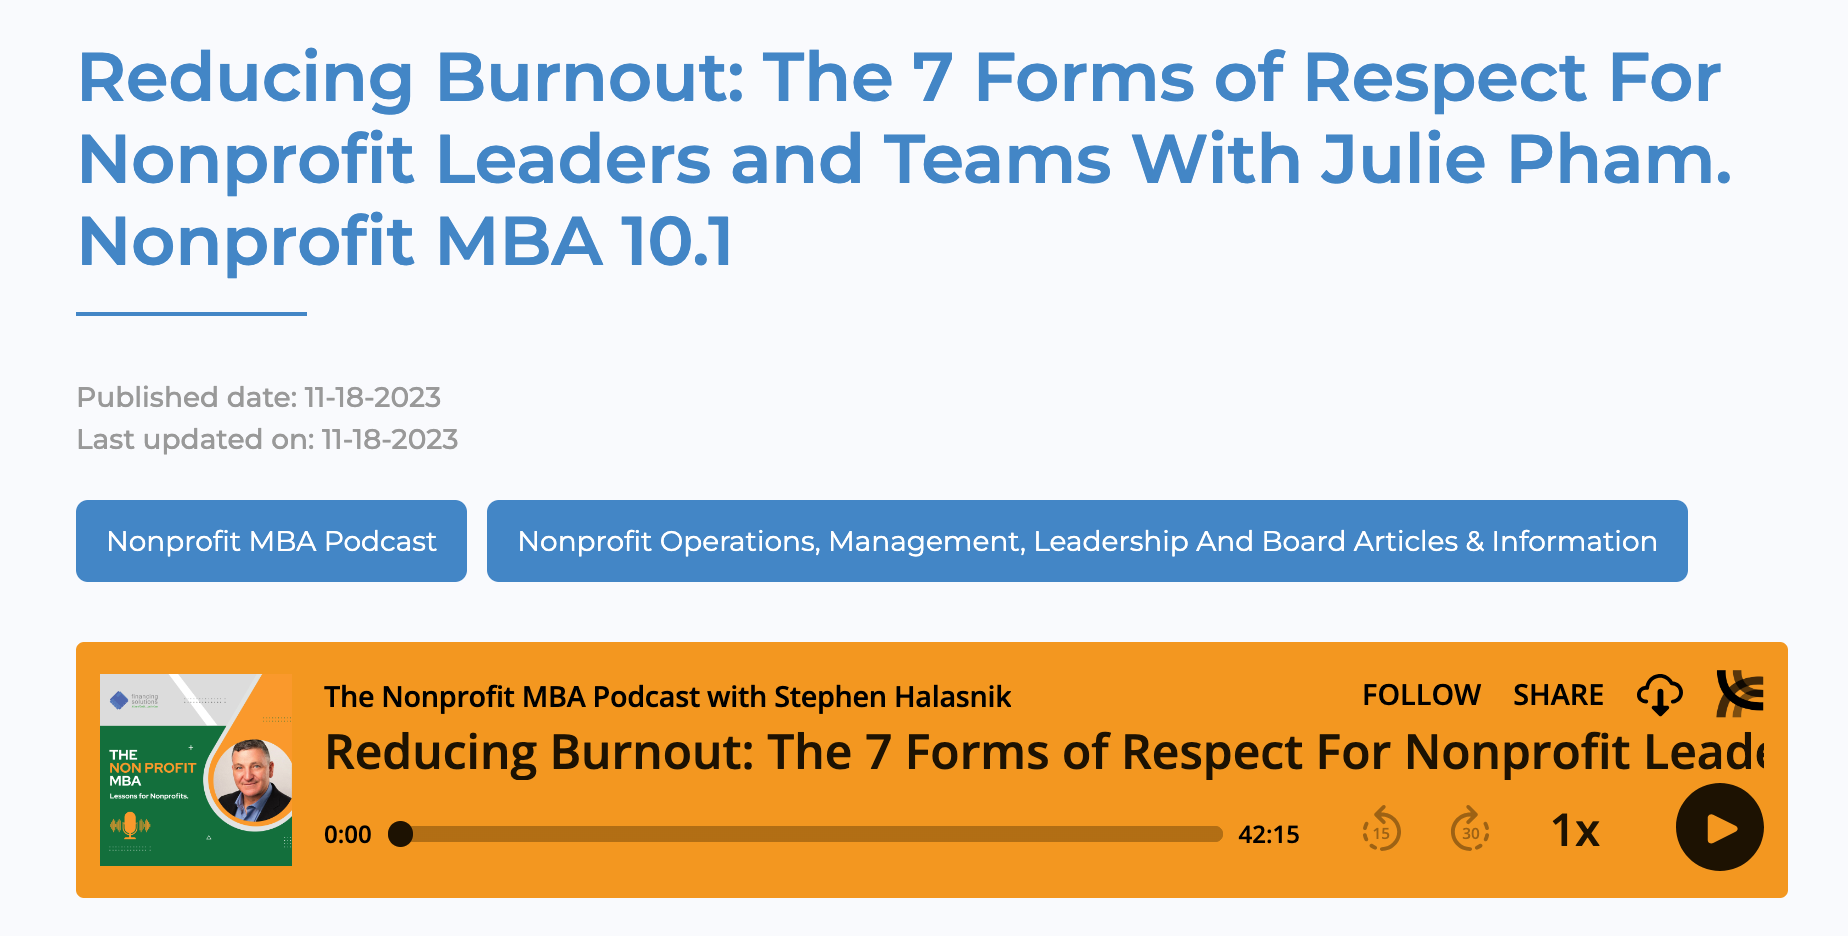 Addressing Burnout in Nonprofits: Insights on Respect and Team Well-being